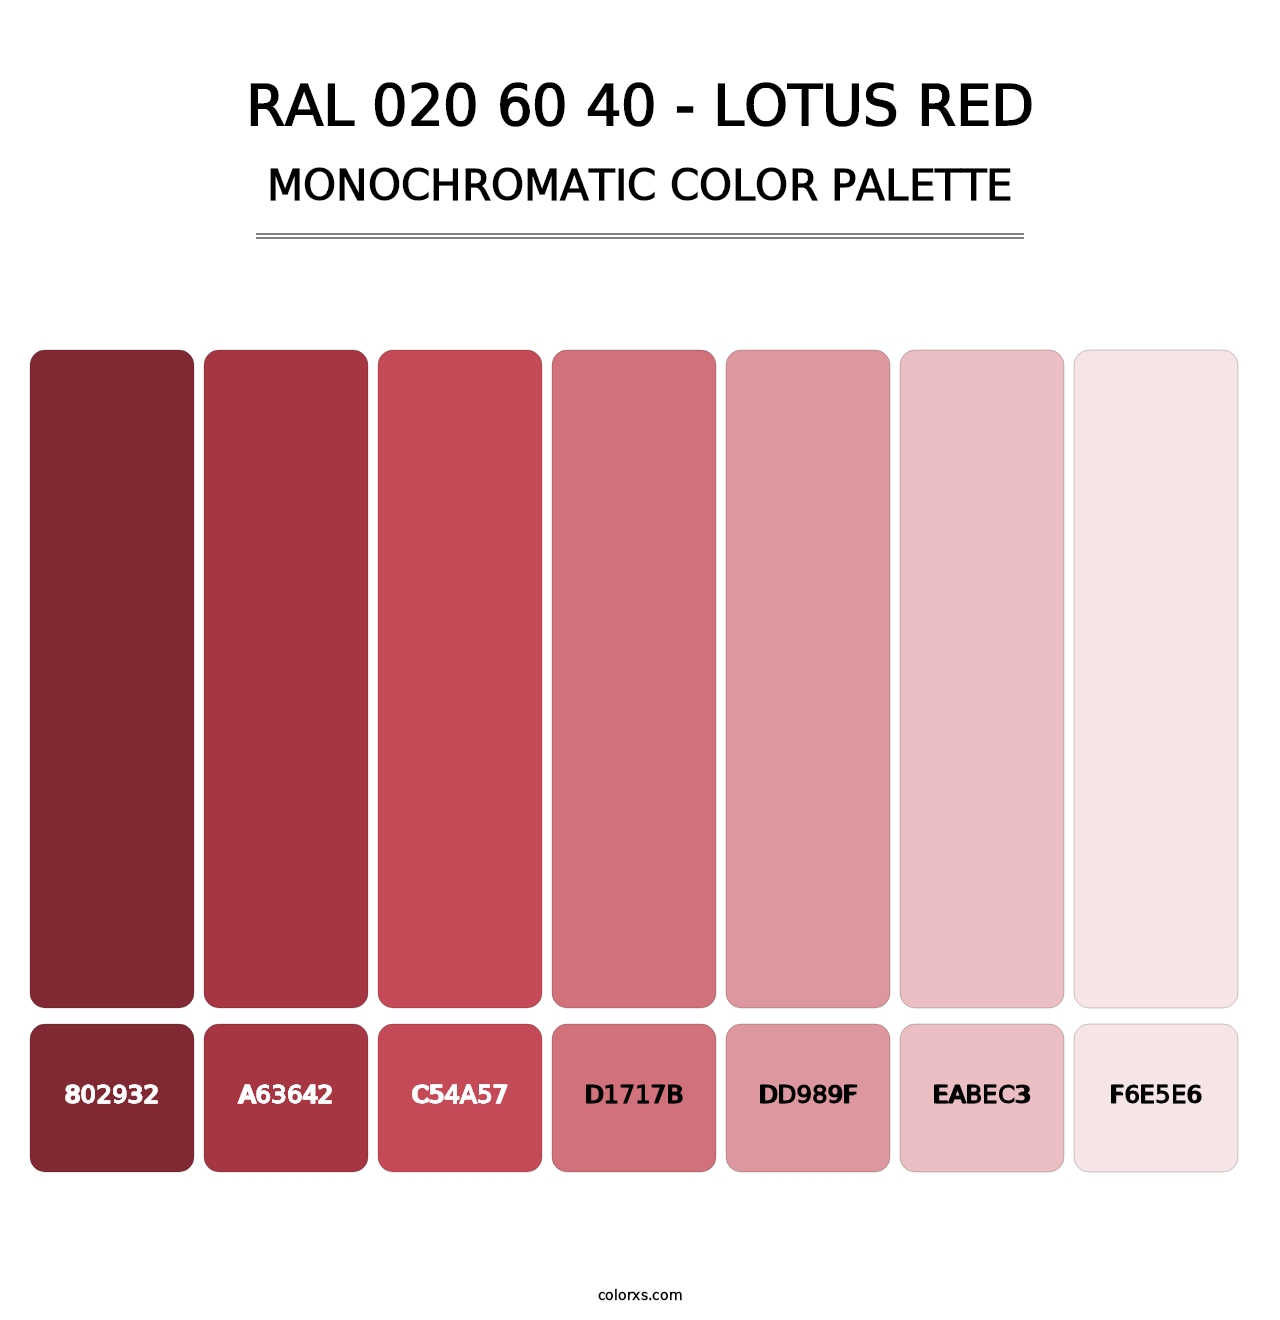 RAL 020 60 40 - Lotus Red - Monochromatic Color Palette